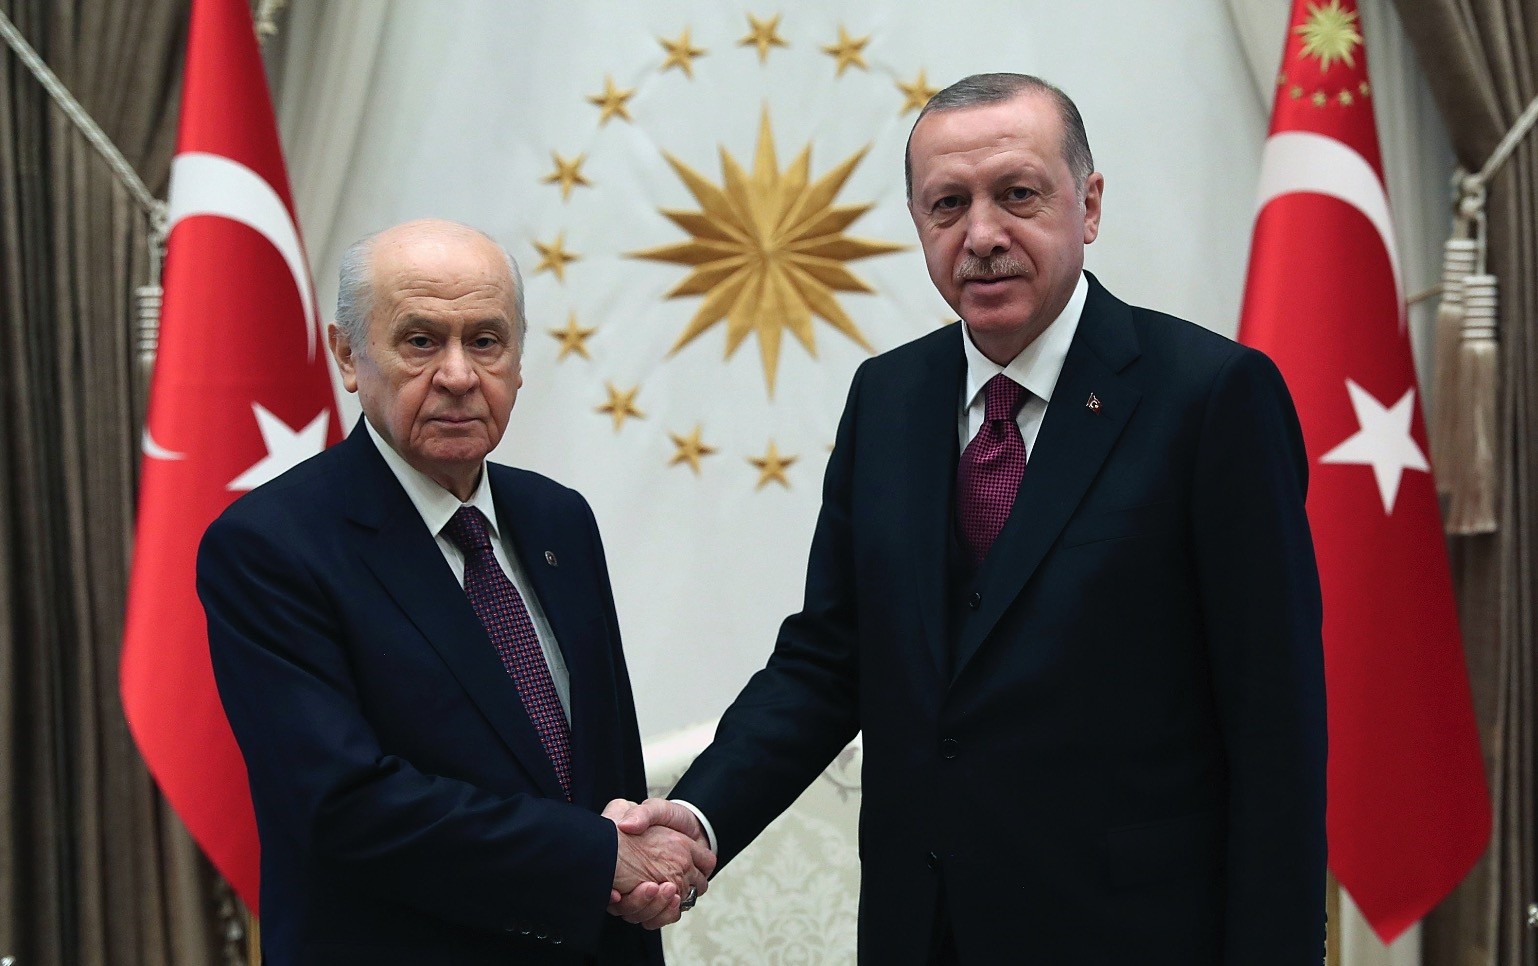 The AK Party & MHP formed the Peopleu2019s Alliance ahead of June 24 elections. The alliance received a majority in Parliament, while their presidential candidate, incumbent President Recep Tayyip Erdou011fan, also won the election by 52.6 pct of the votes.